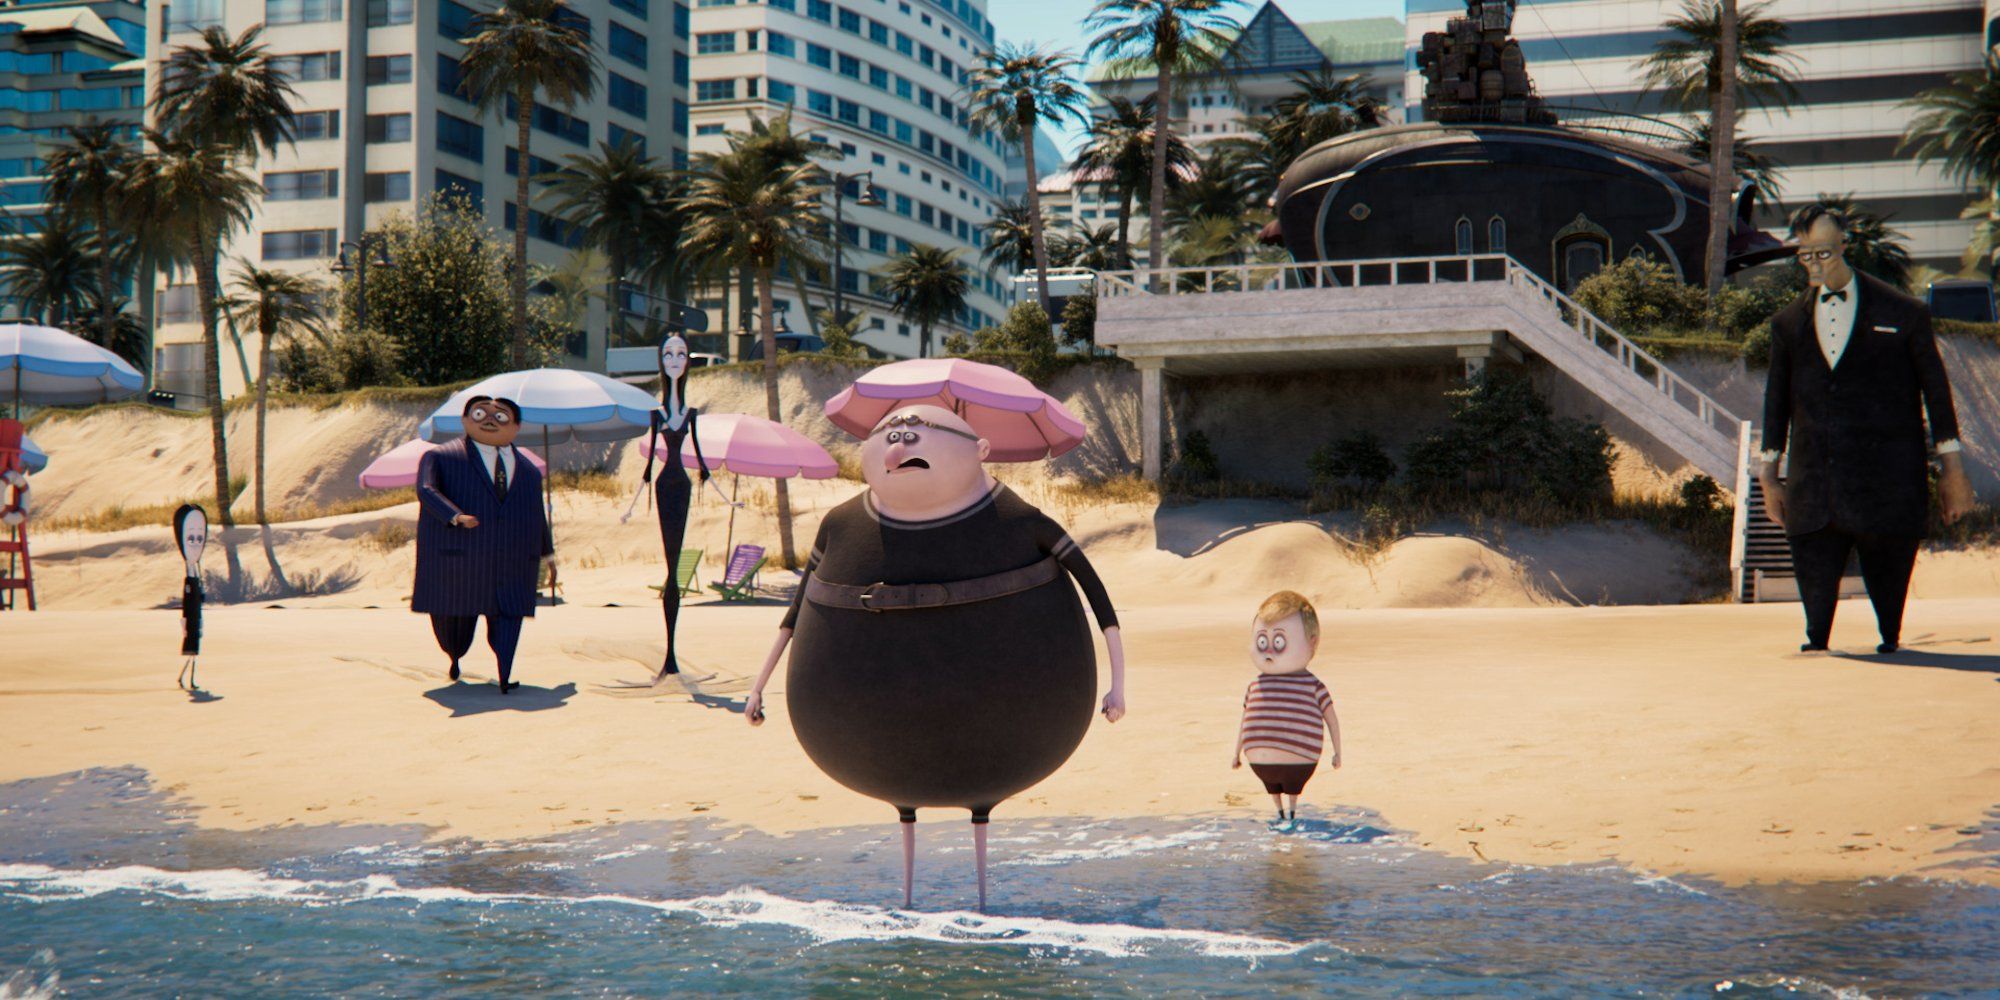 The Addams Family at the beach with Uncle Fester about to swim in the ocean in The Addams Family 2.